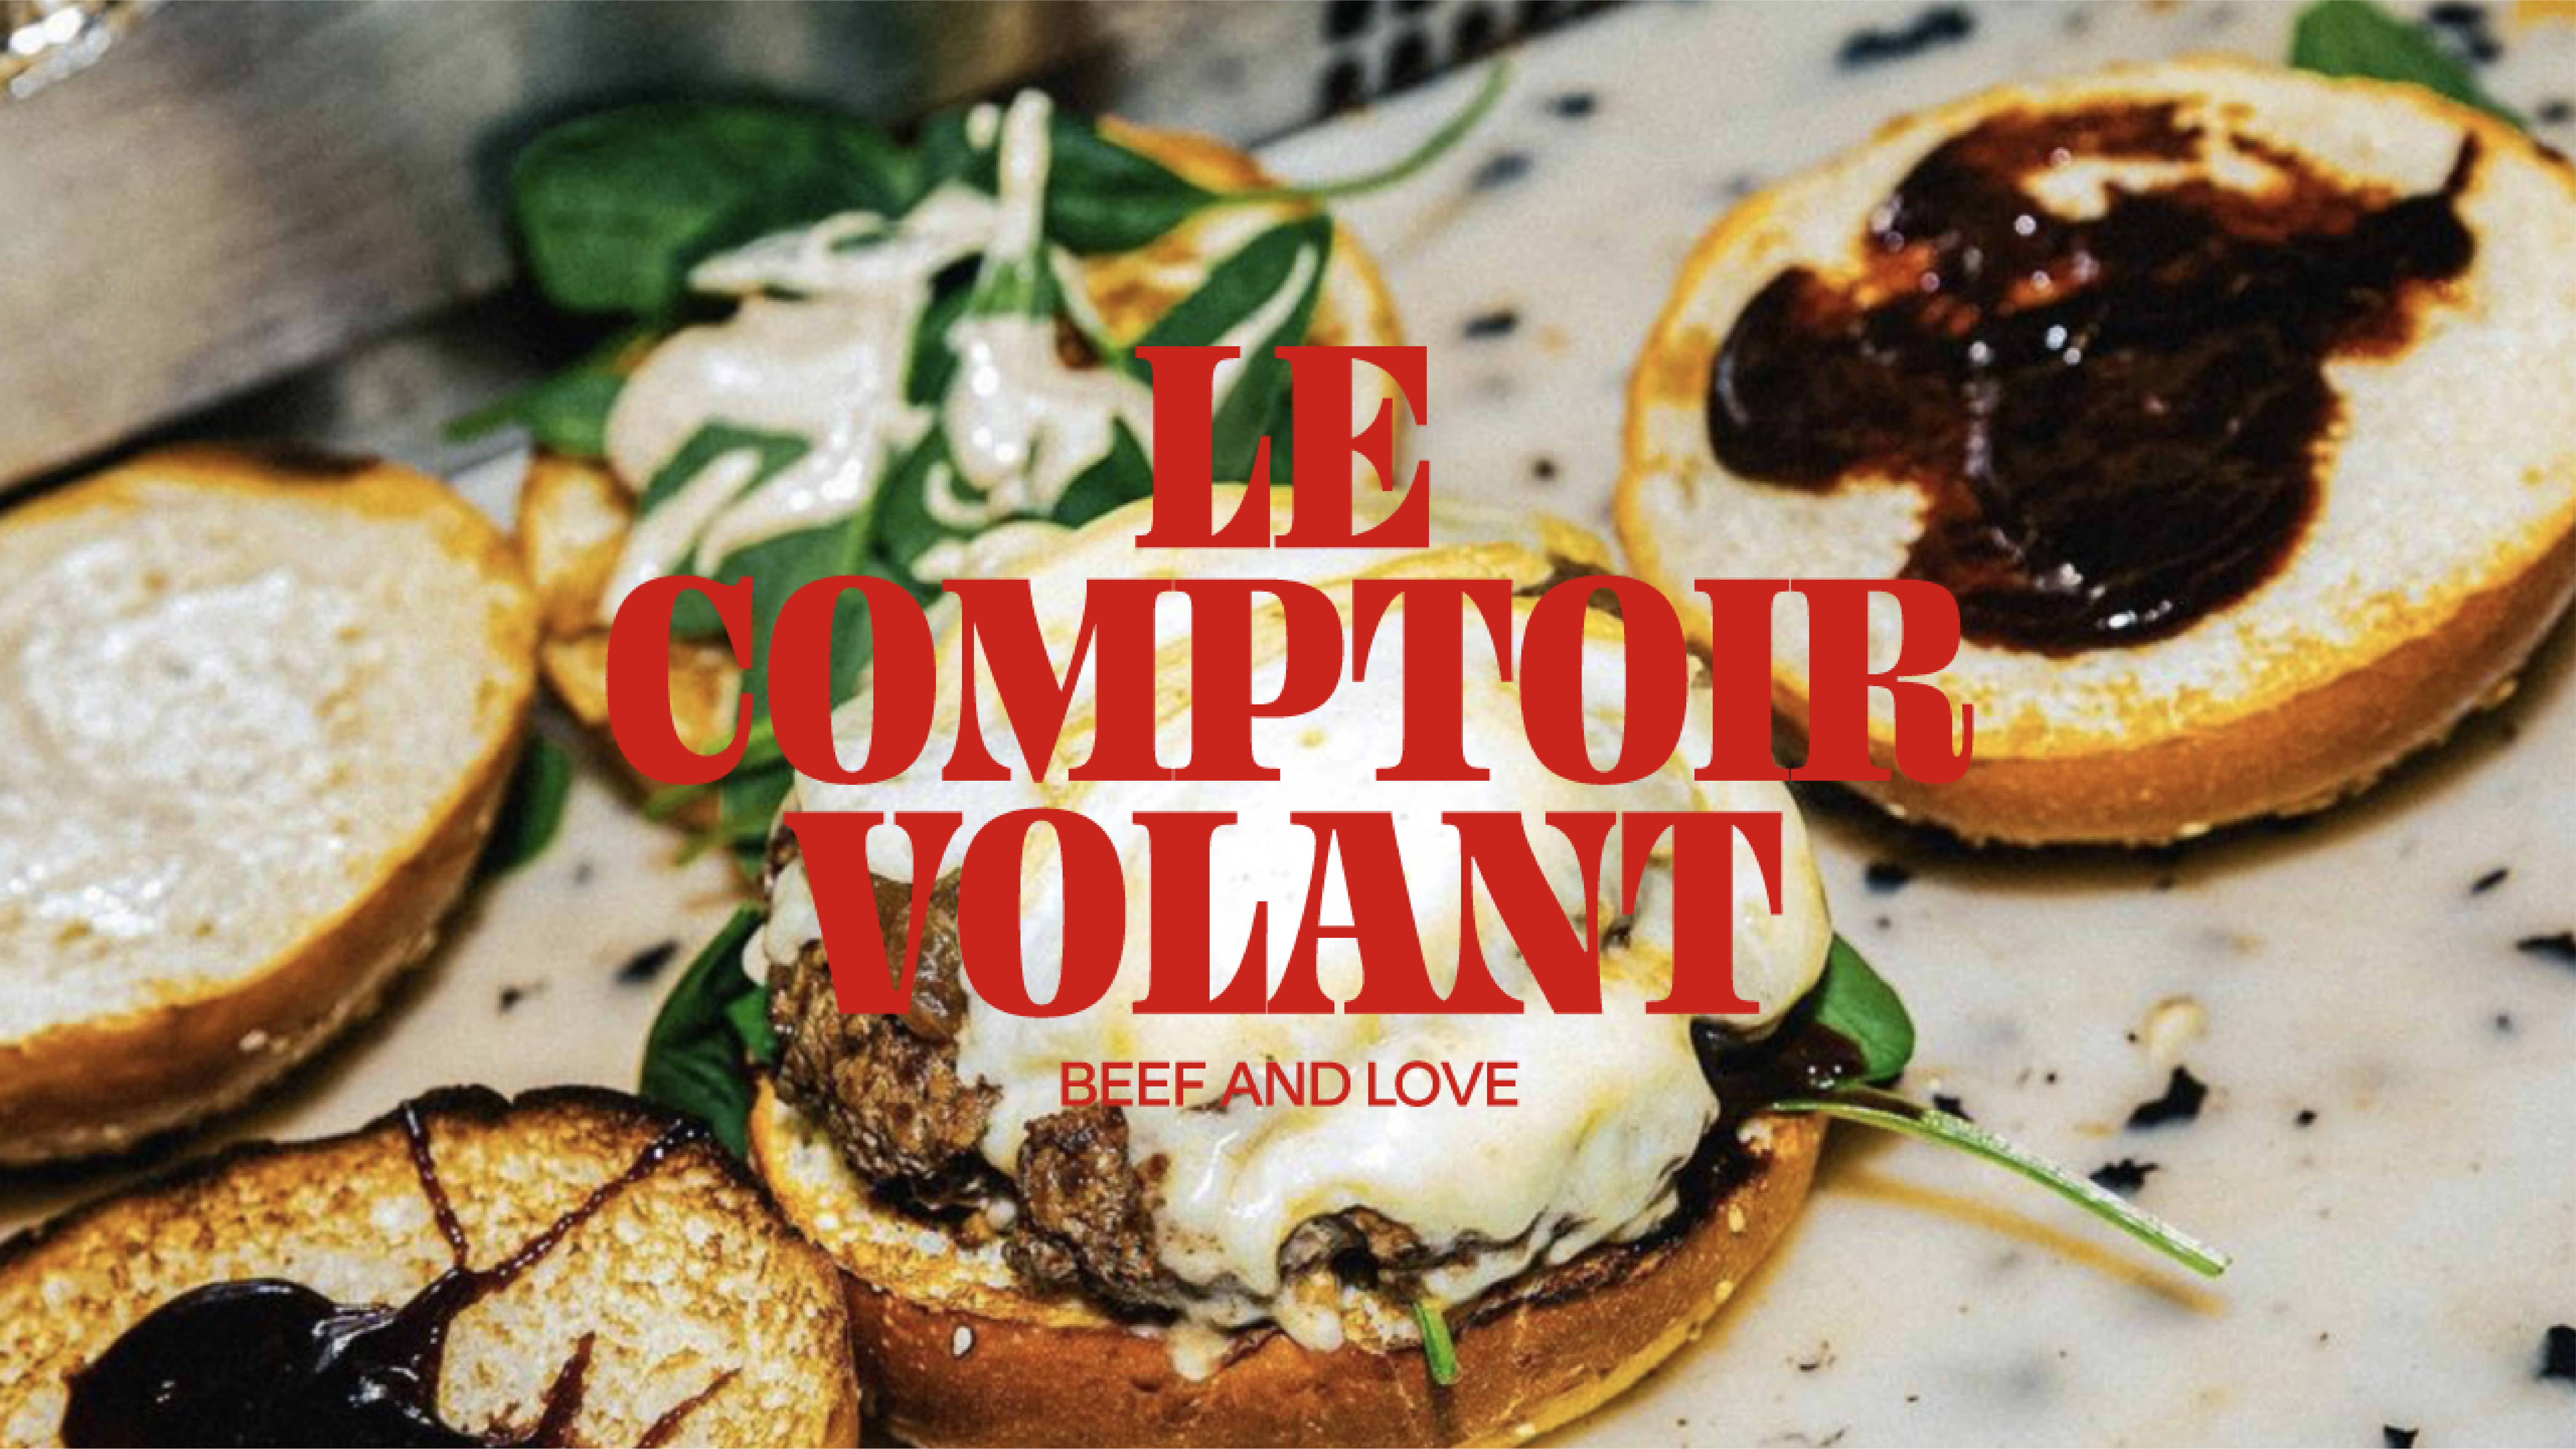 Le Comptoir Volant 3229 - Nash and Young